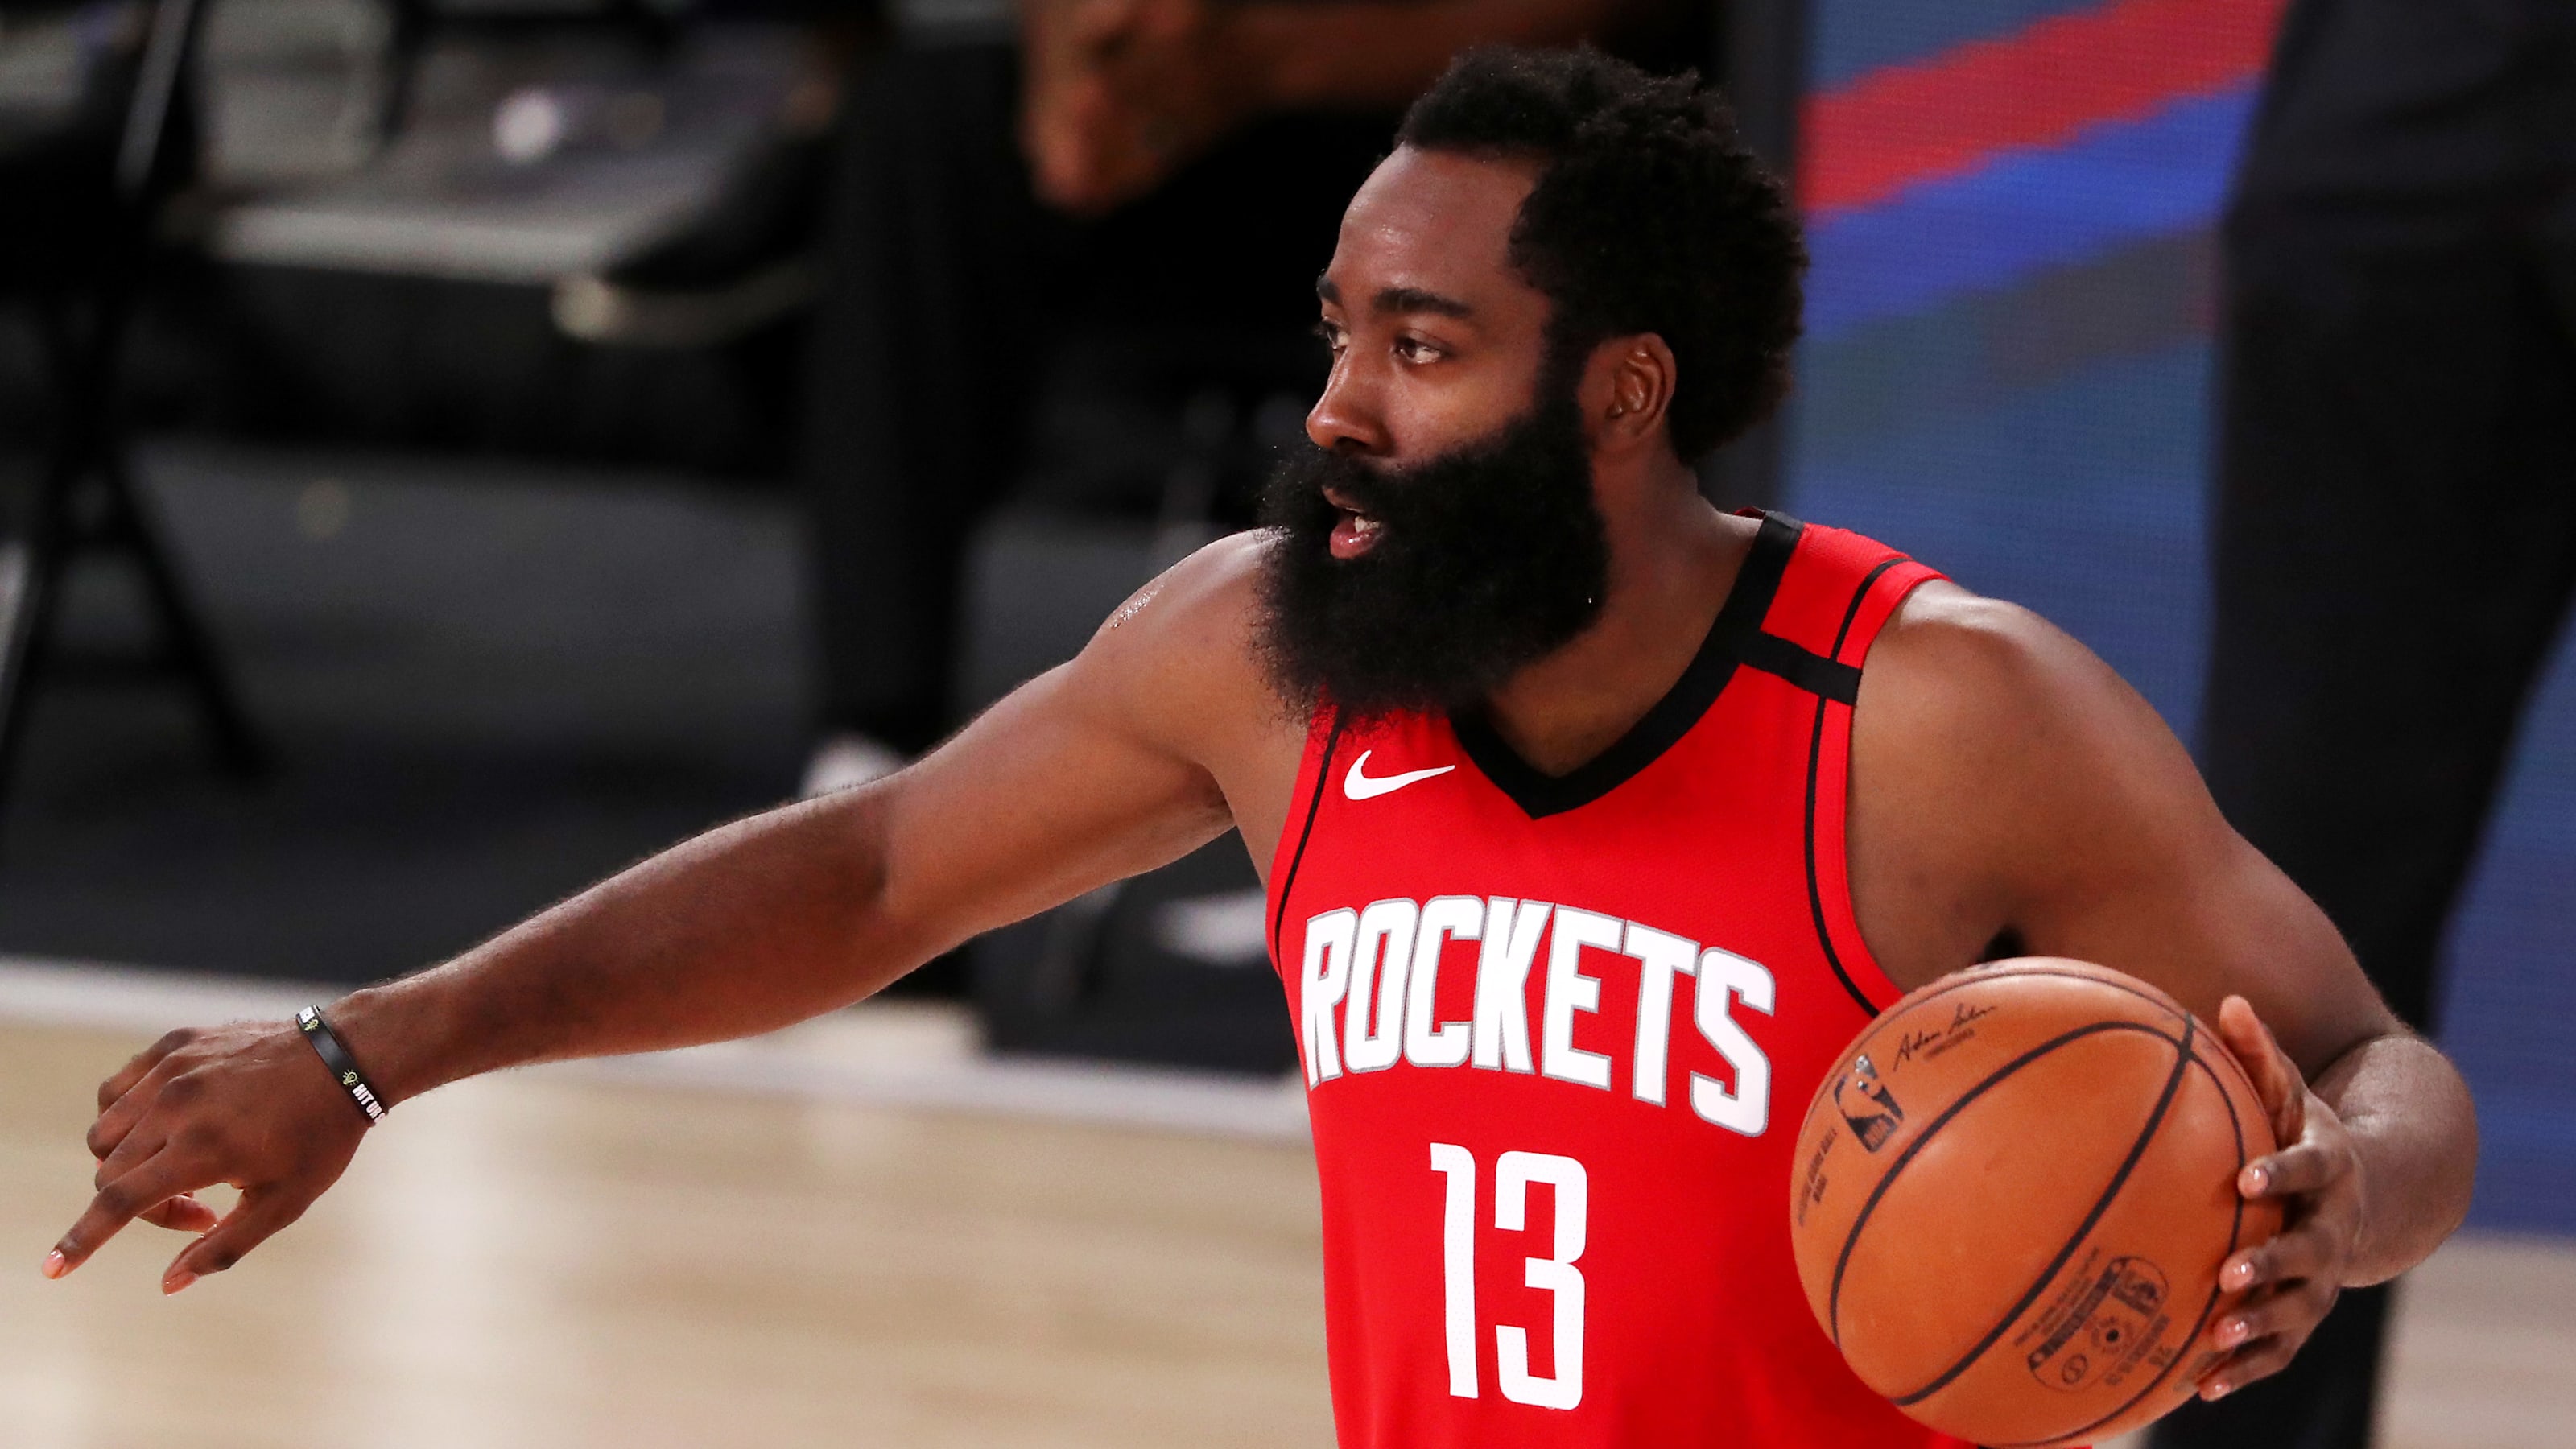 Nba Schedule Milwaukee Bucks Vs Houston Rockets Times Fixtures Where To Watch Live In India